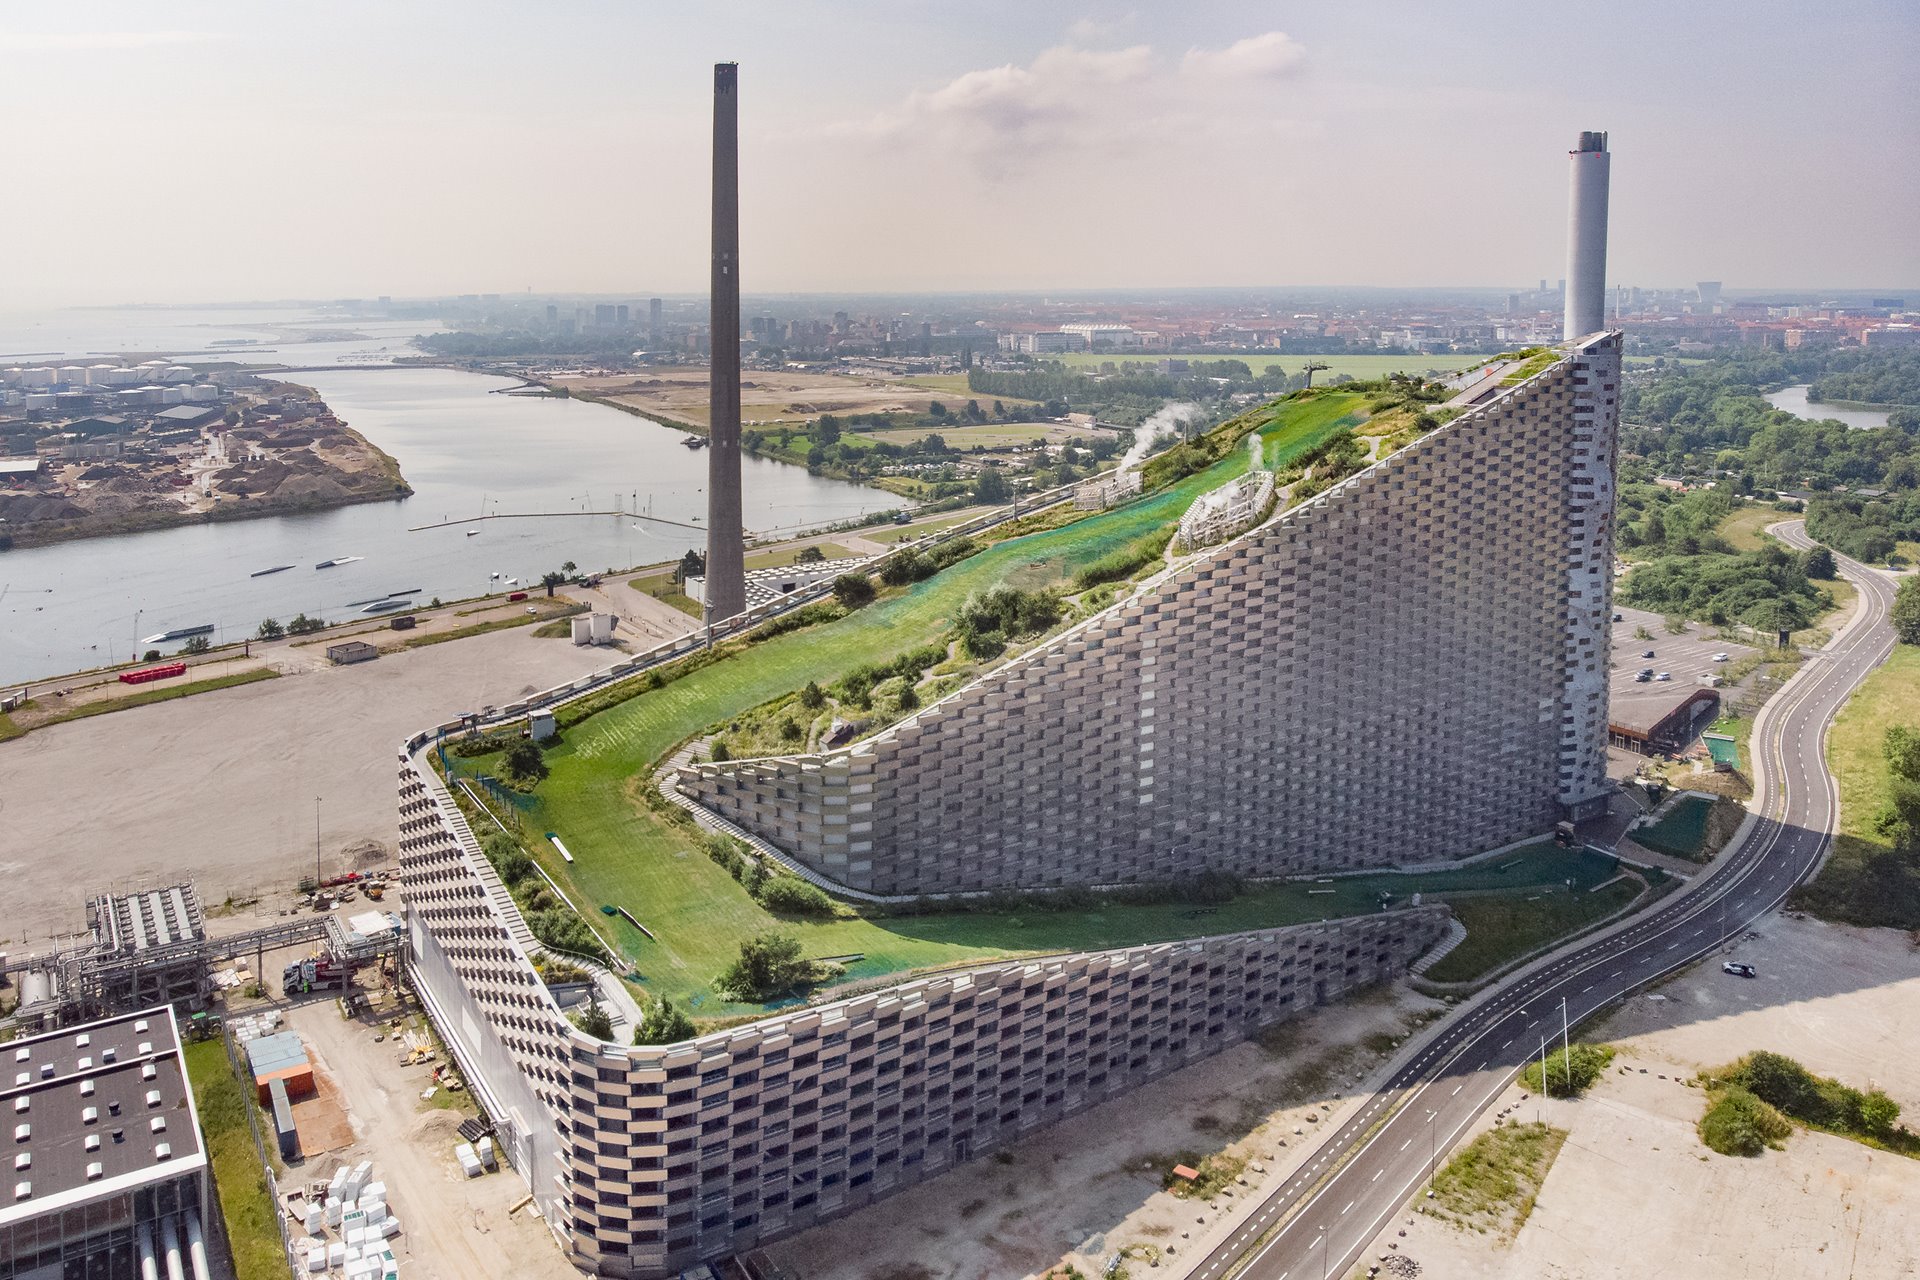 This waste-to-energy heat-and-power plant in the industrial outskirts of Copenhagen, Denmark, burns around 440,000 tons of waste a year to supply more than 30,000 homes in and around Copenhagen with electricity, and 72,000 homes with heating (recycled from flue gas condensation using heat pumps). The plant uses a filter to remove harmful pollutants from its incineration exhaust, and hosts an all-seasons ski run and public green space on its roof.